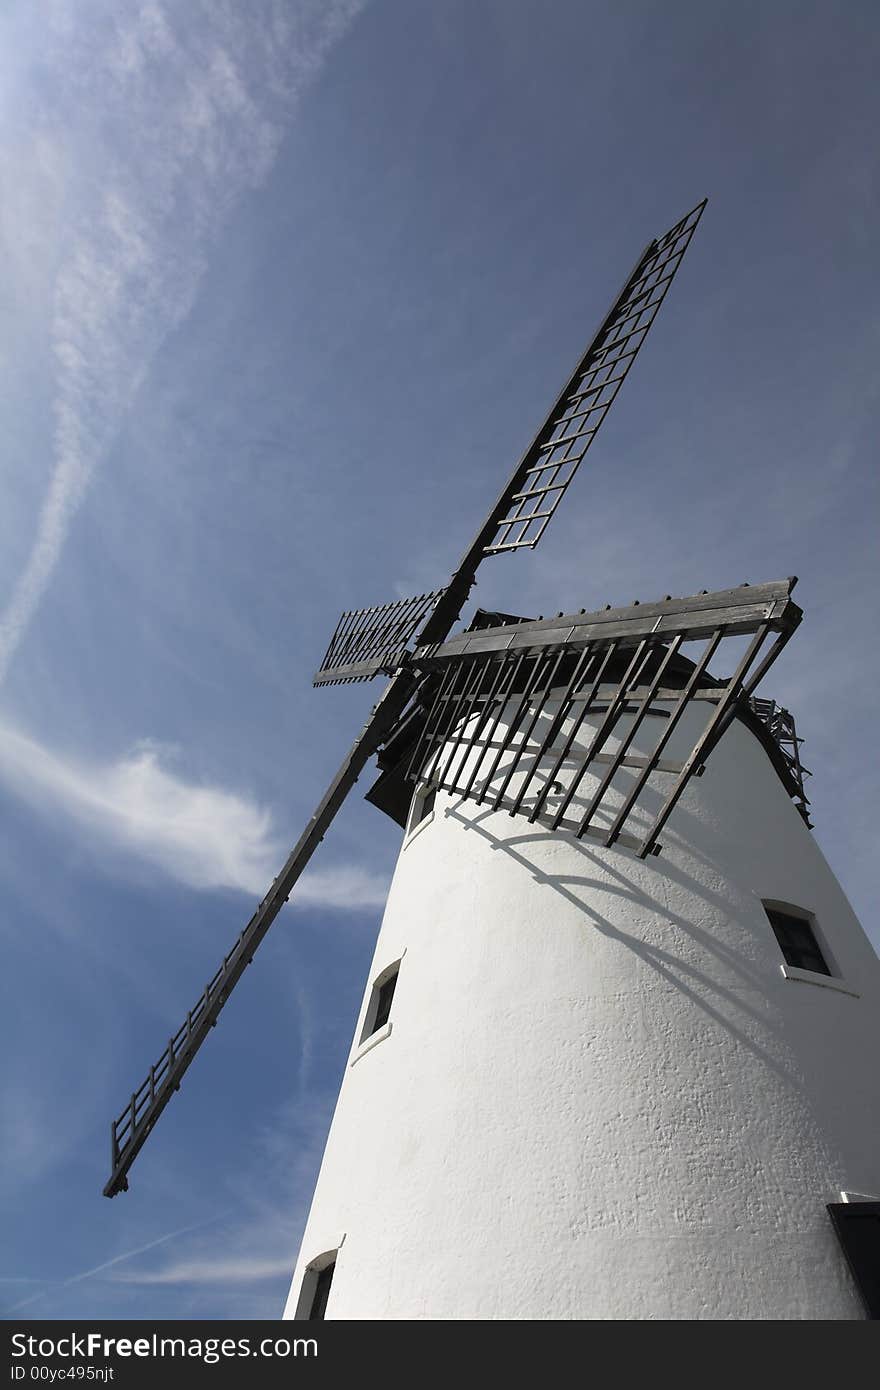 White windmill with black sails against blue sky